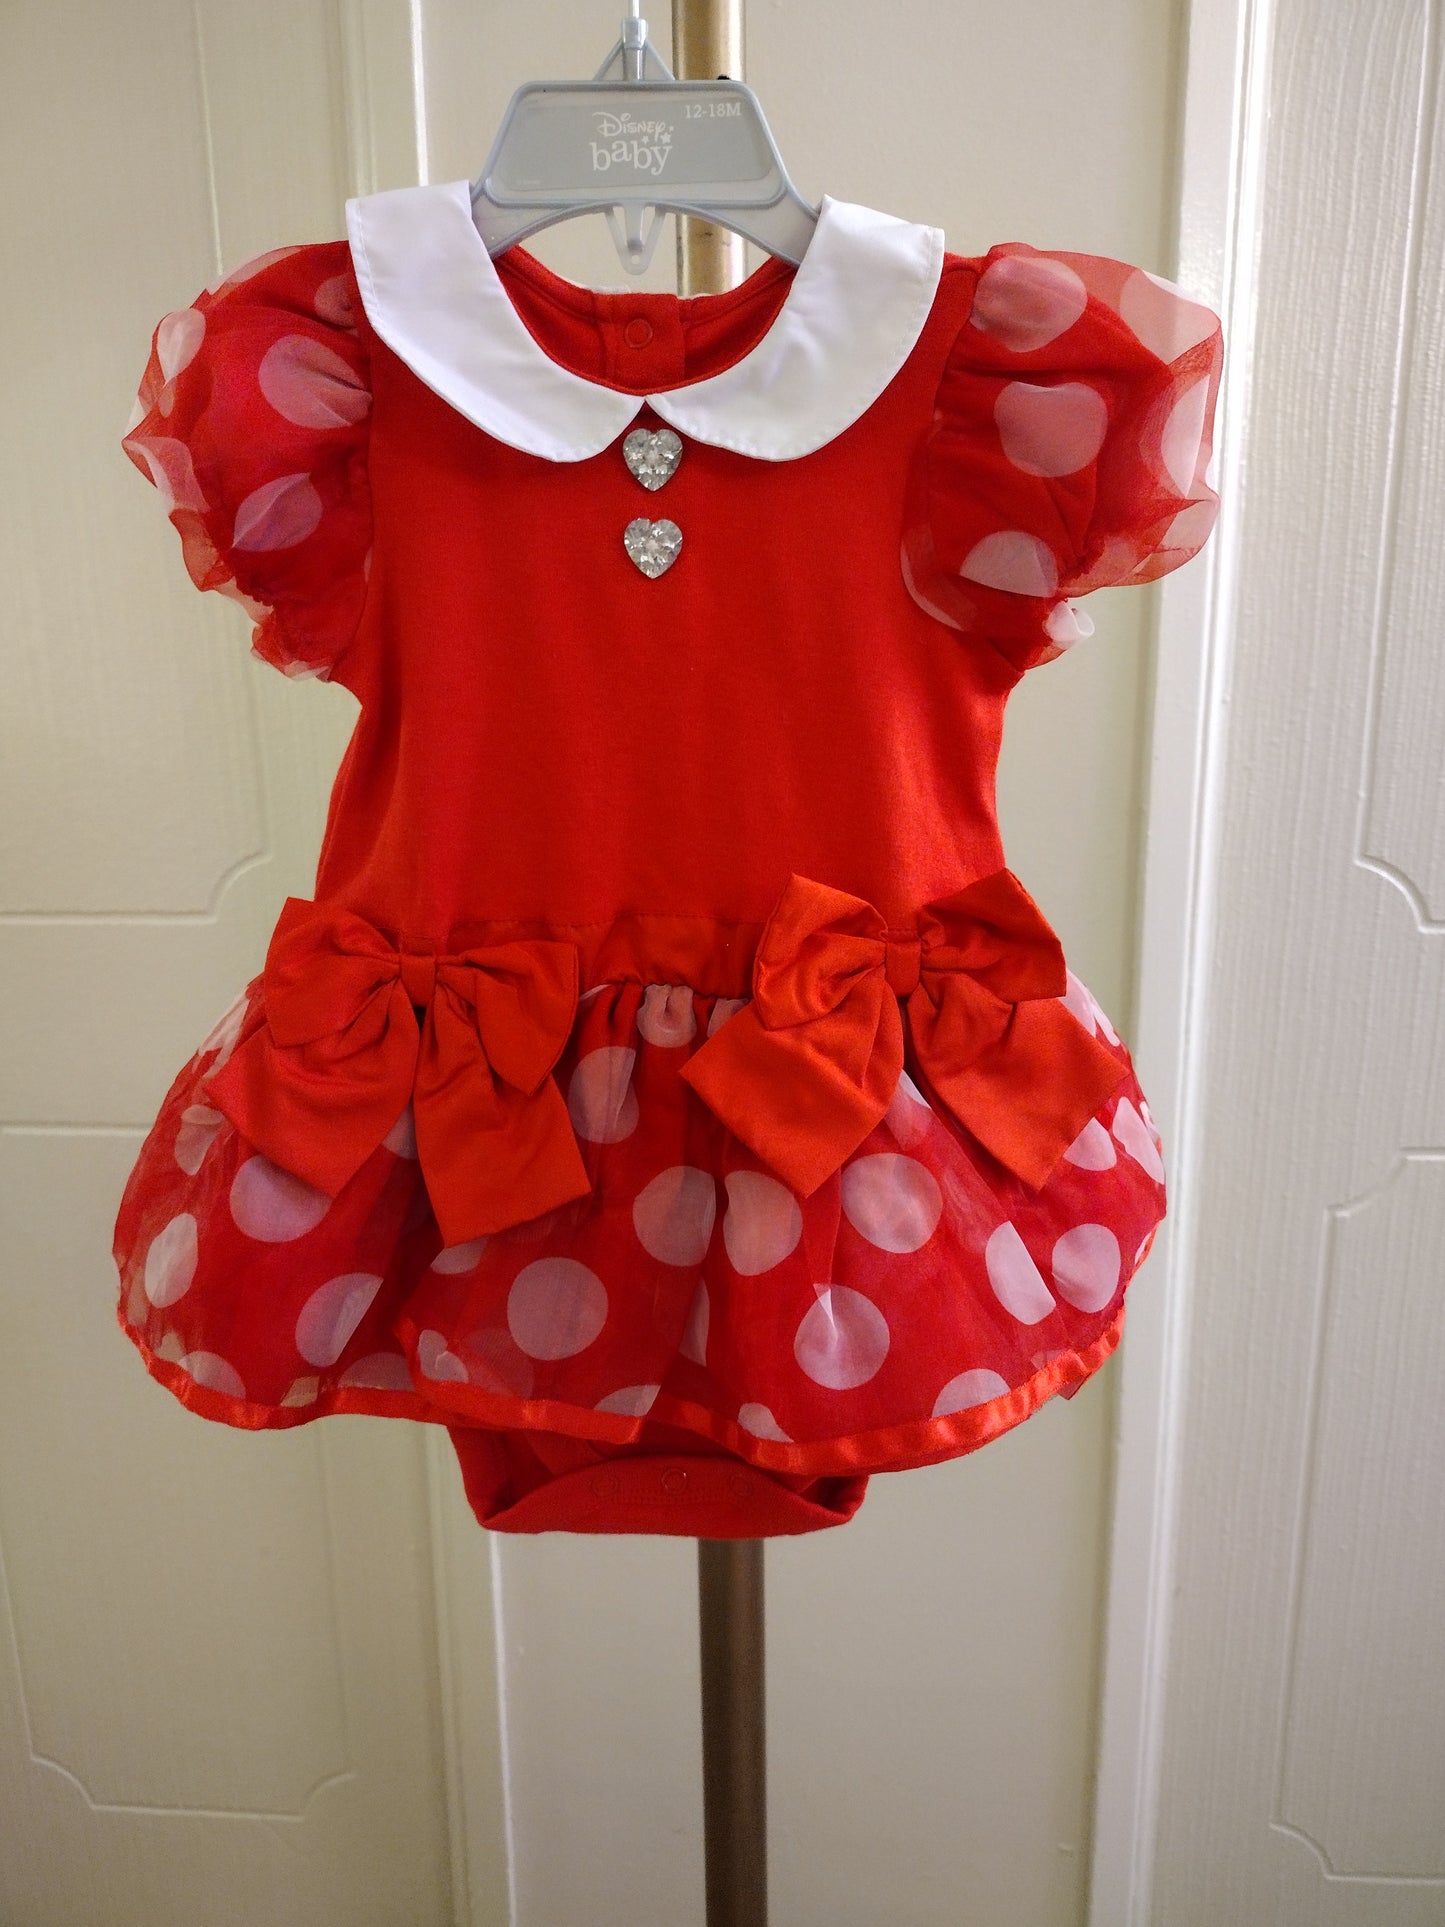 Disney Baby Minnie Mouse Dress With Headband 18-24 Months Body Suit One Piece